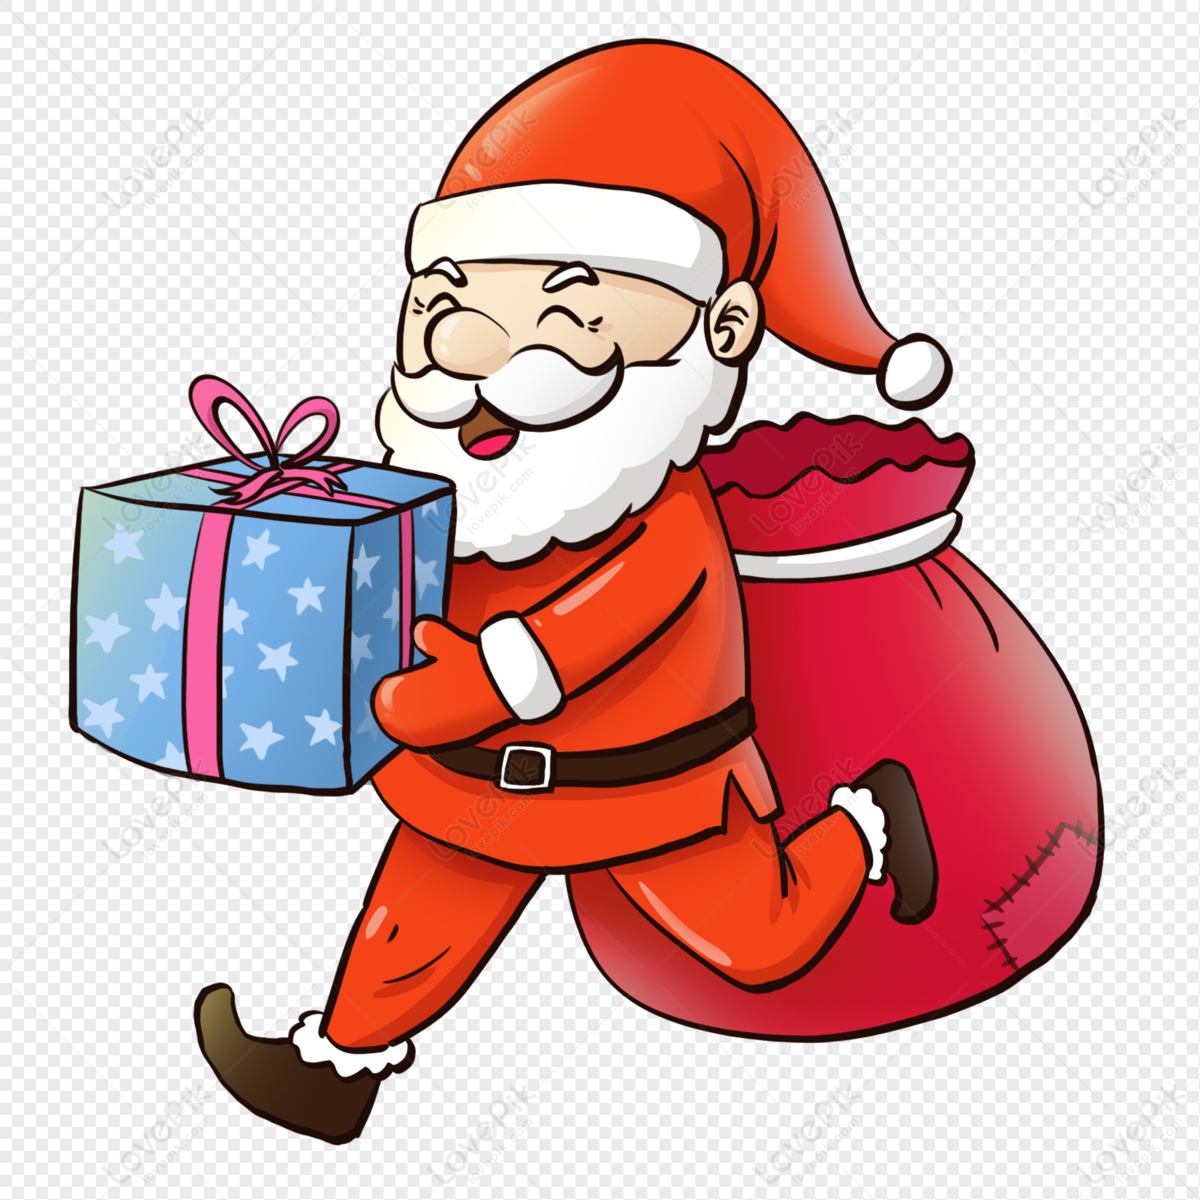 Hand Drawn Cartoon Santa Claus PNG Transparent And Clipart Image For Free  Download - Lovepik | 401652276